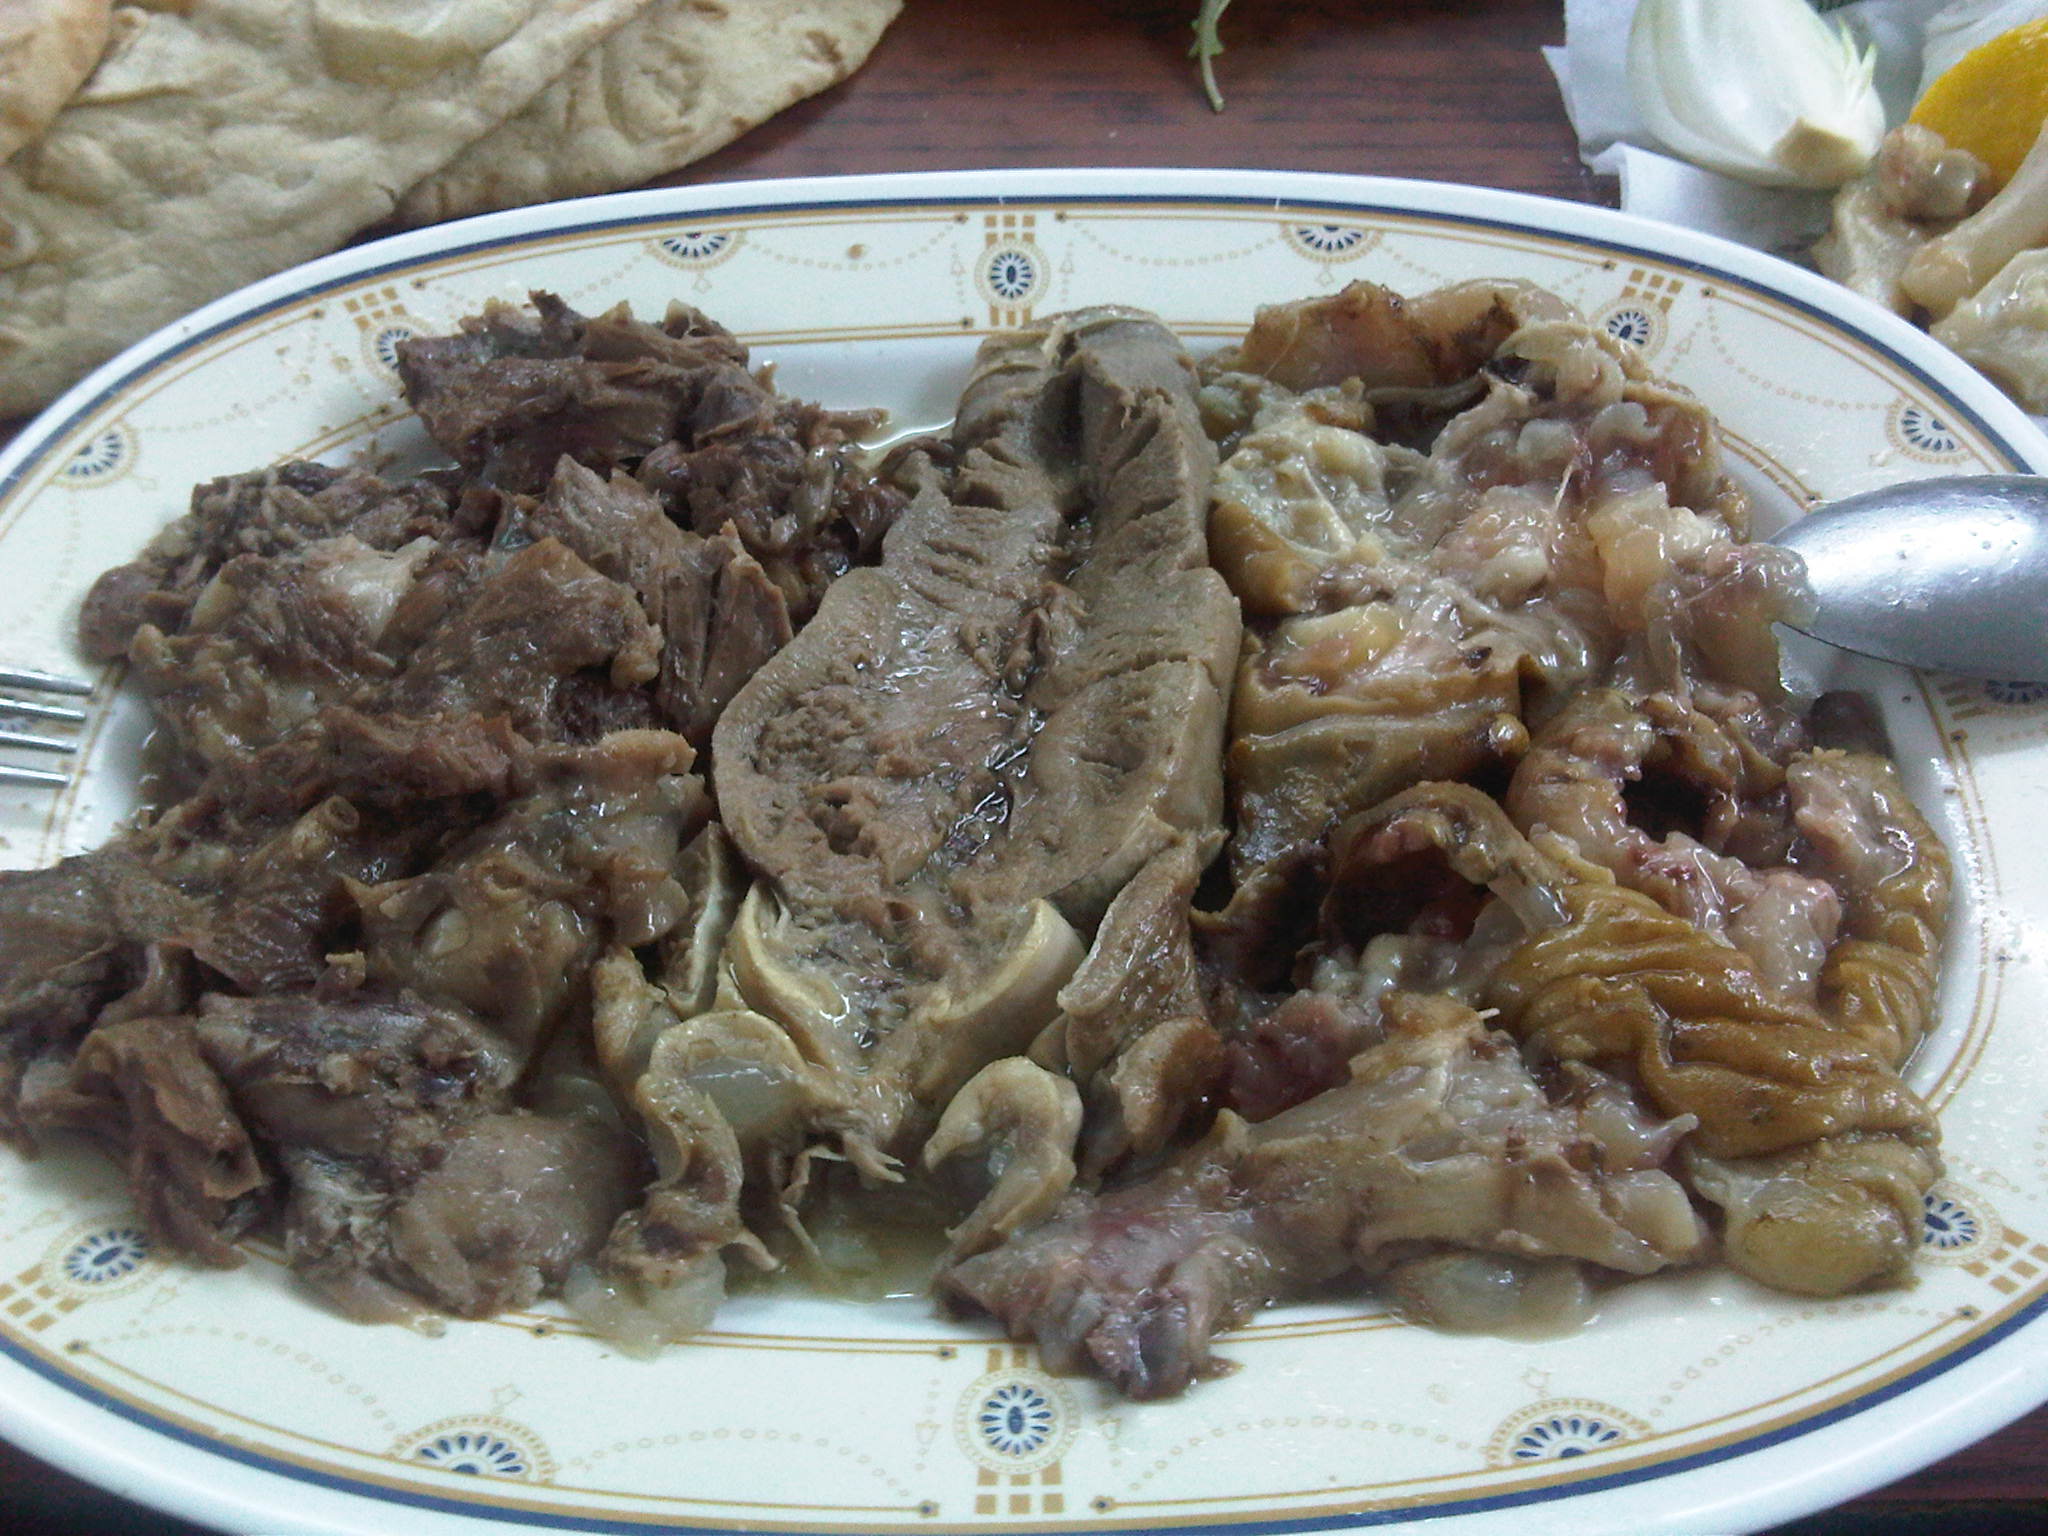 a close up of a plate of food with meat and other foods